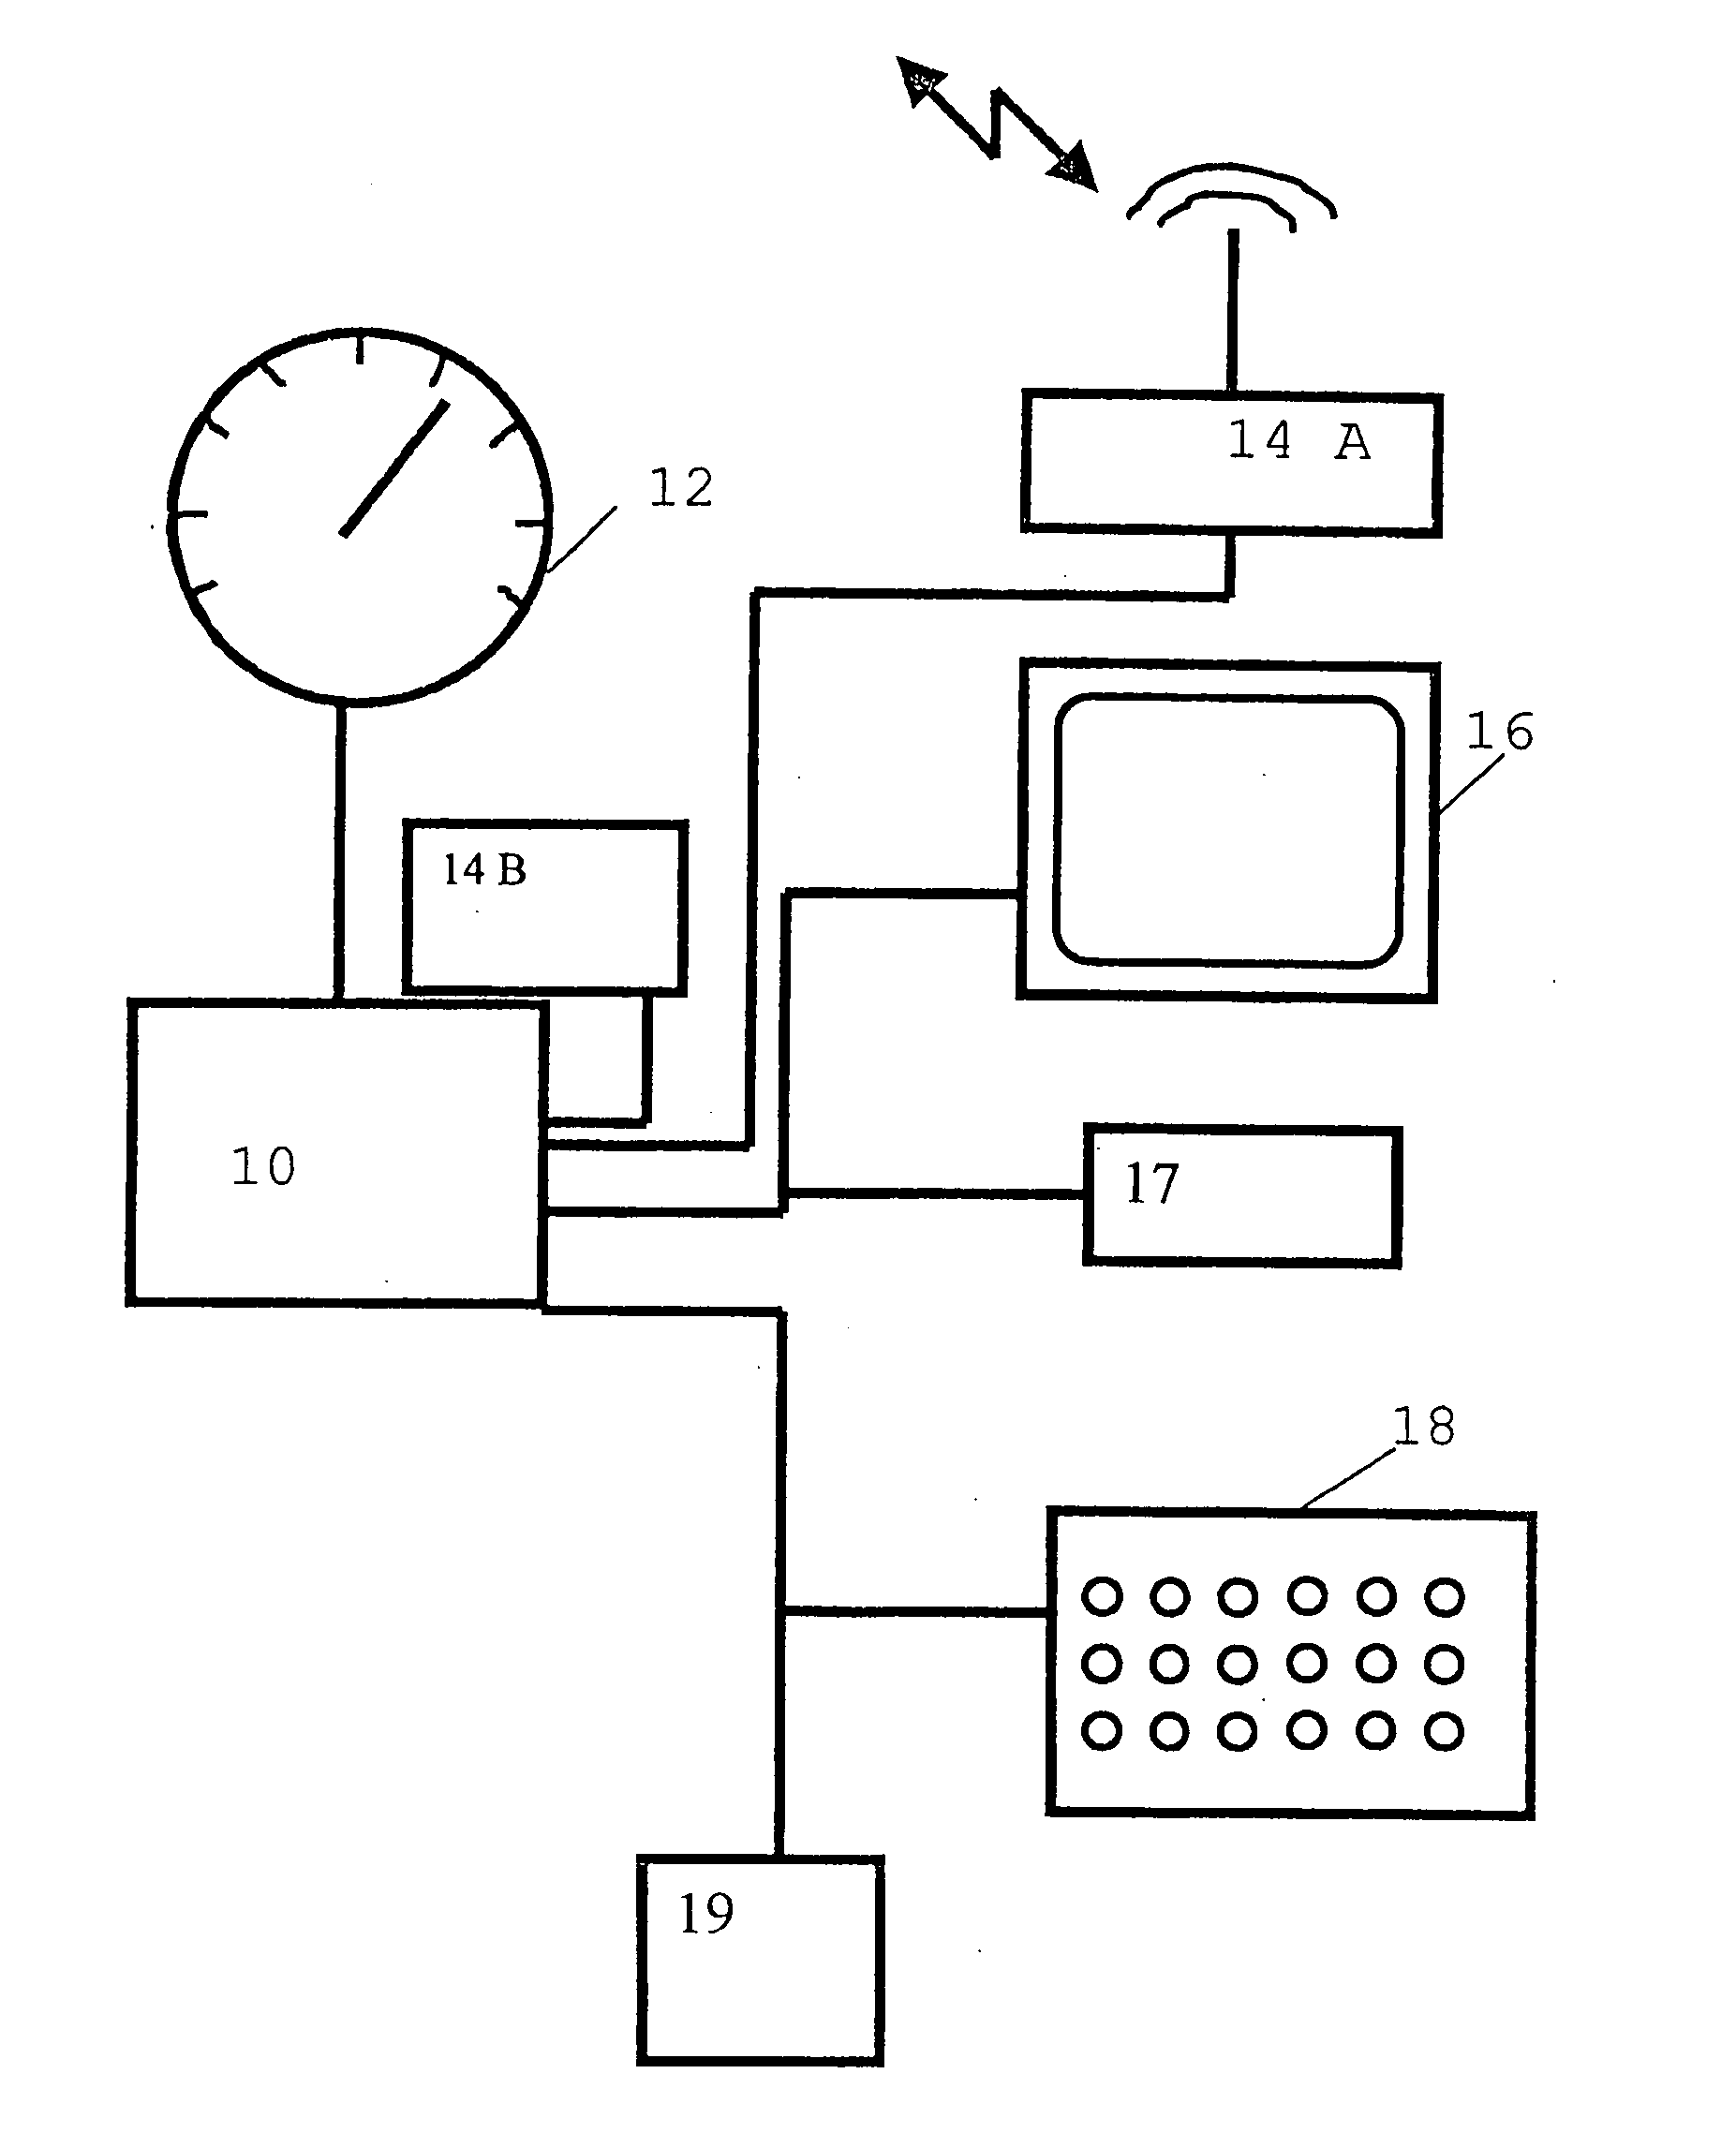 Speed dependent service availability in a motor vehicle